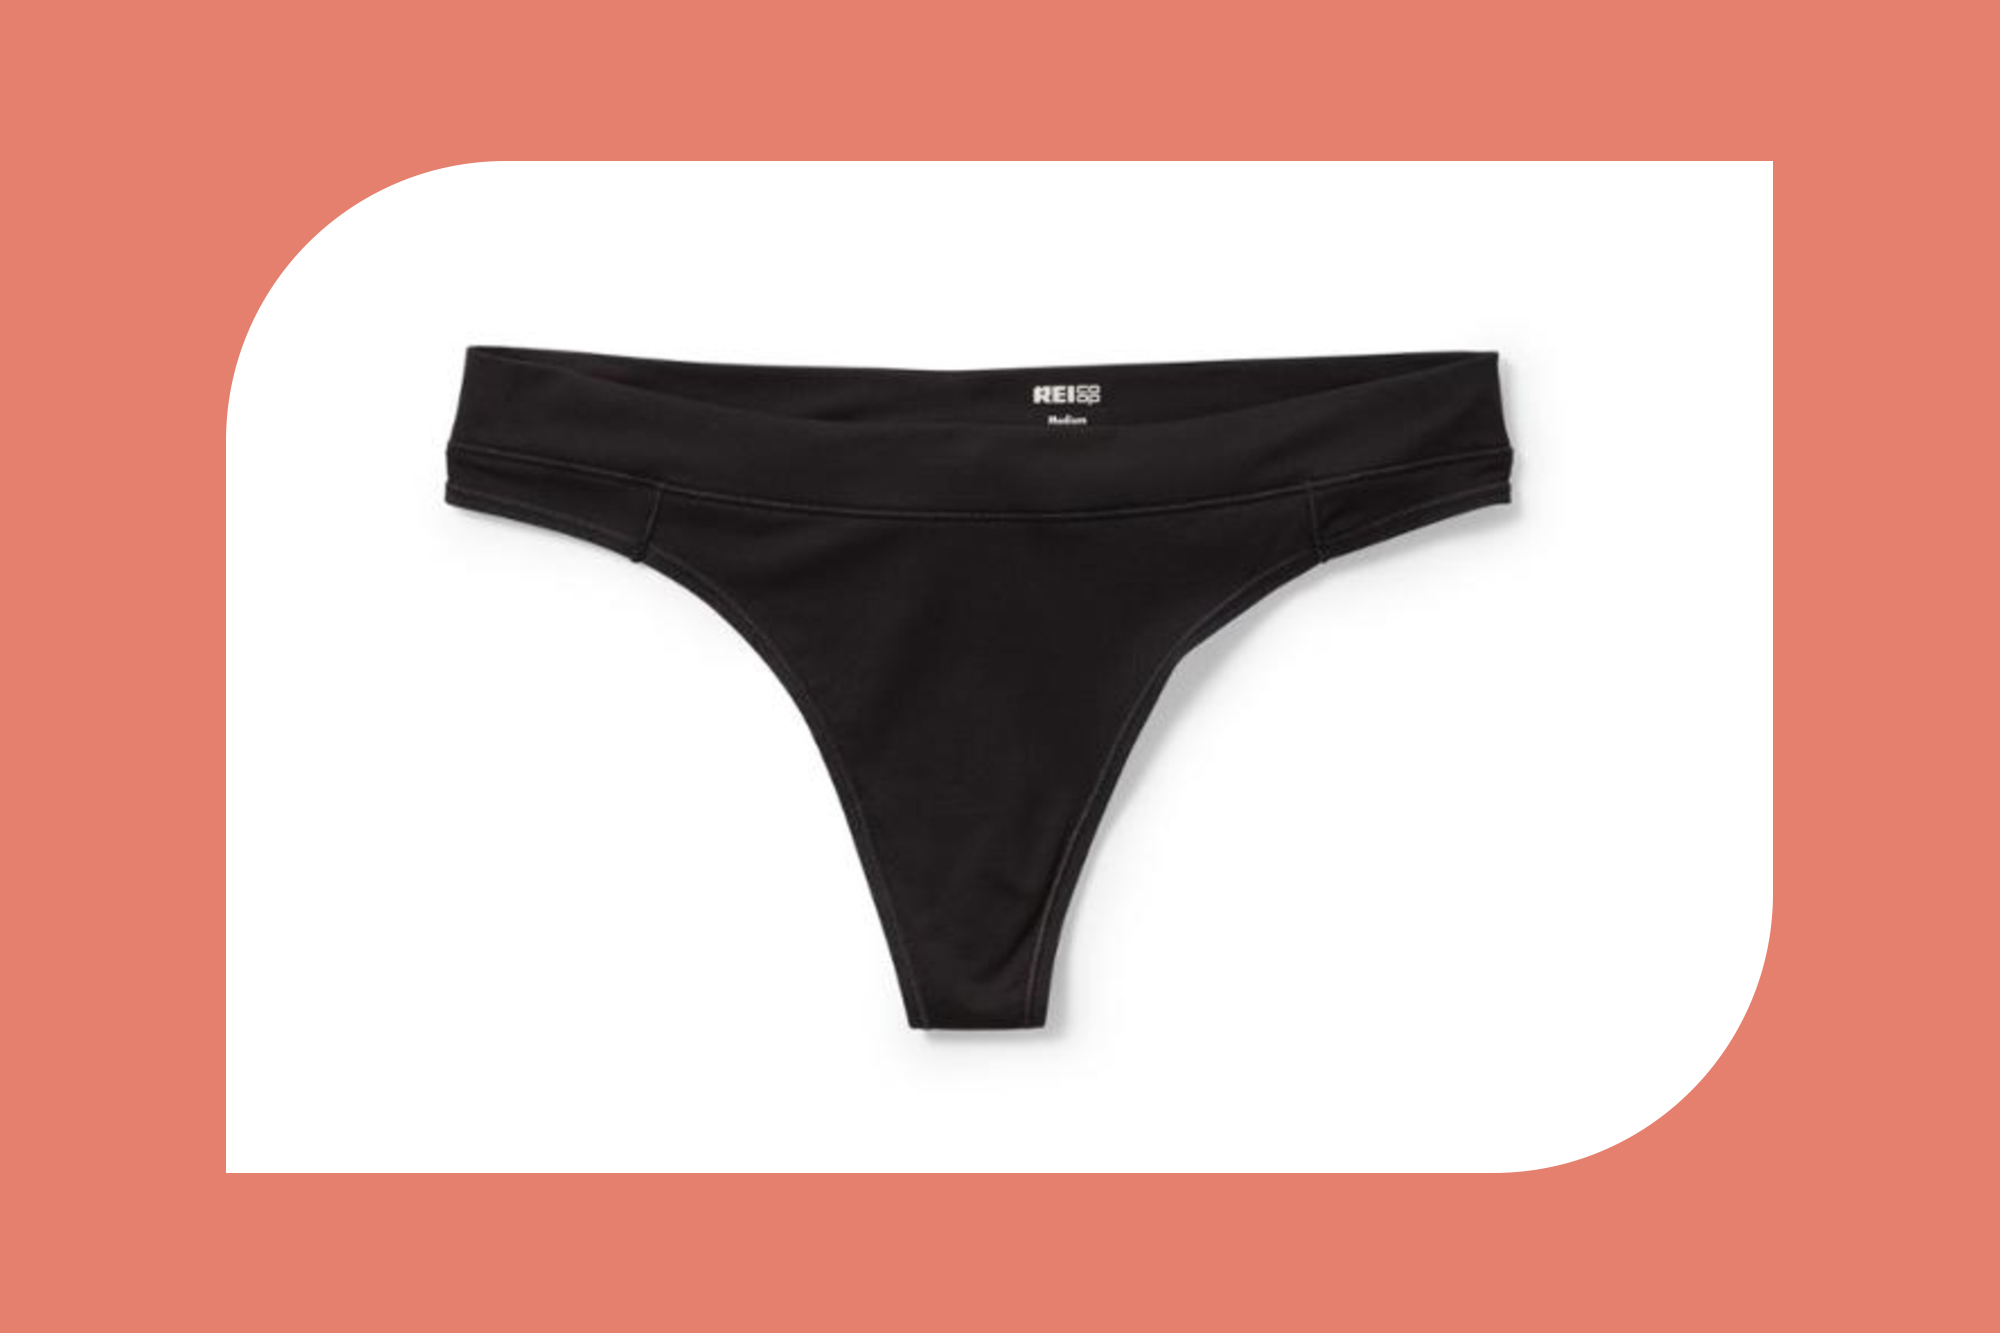 The 7 Best Men's Athletic Underwear for Every Type of Workout